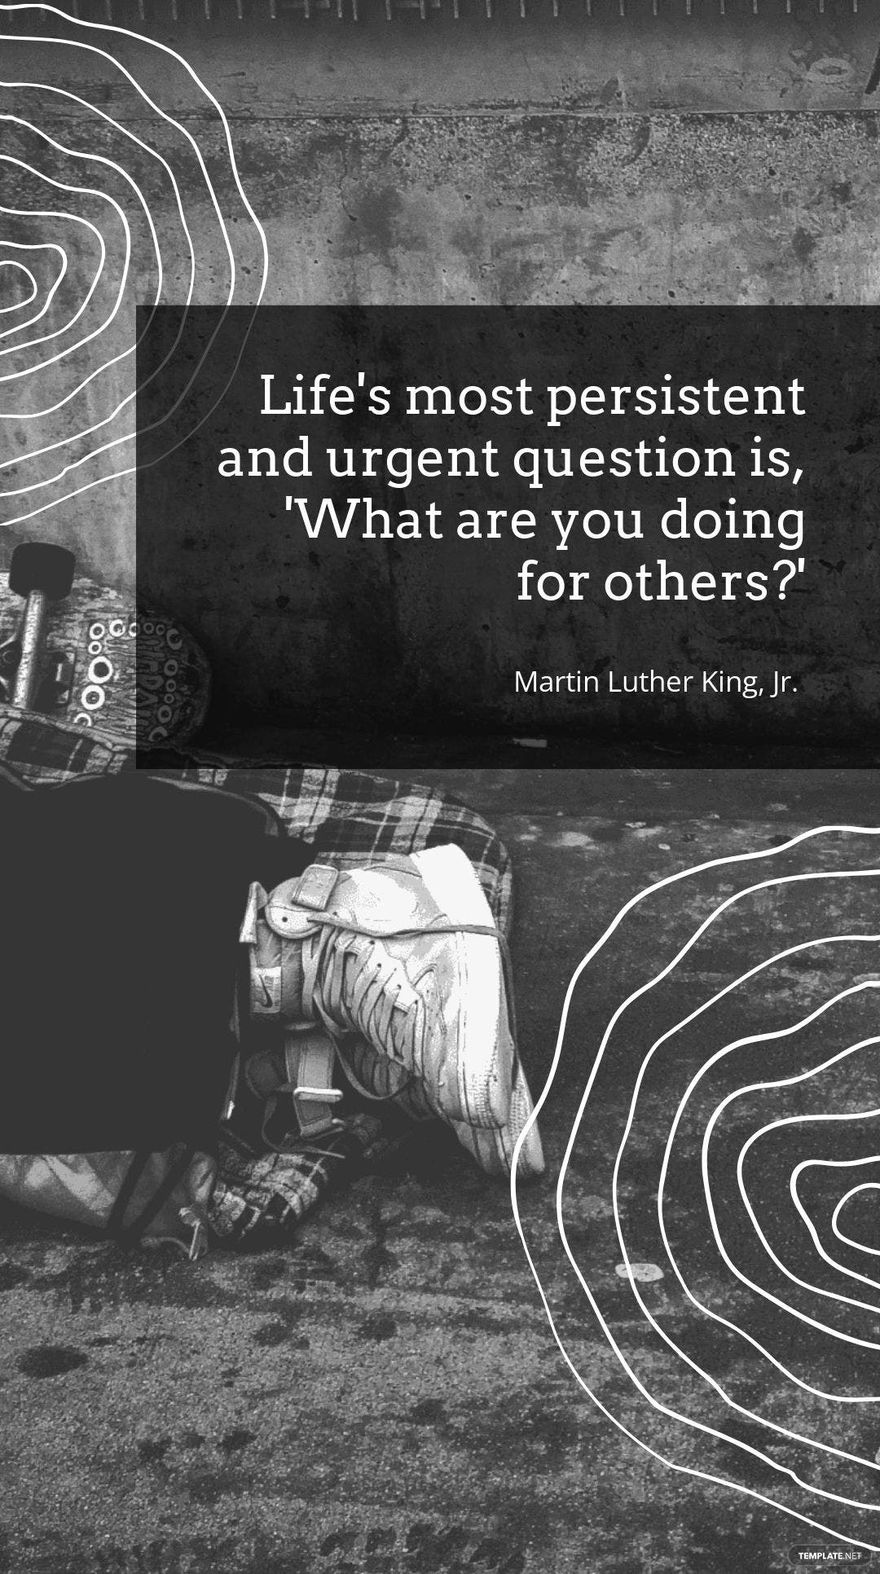 Martin Luther King, Jr. - "Life's most persistent and urgent question is, 'What are you doing for others?'"